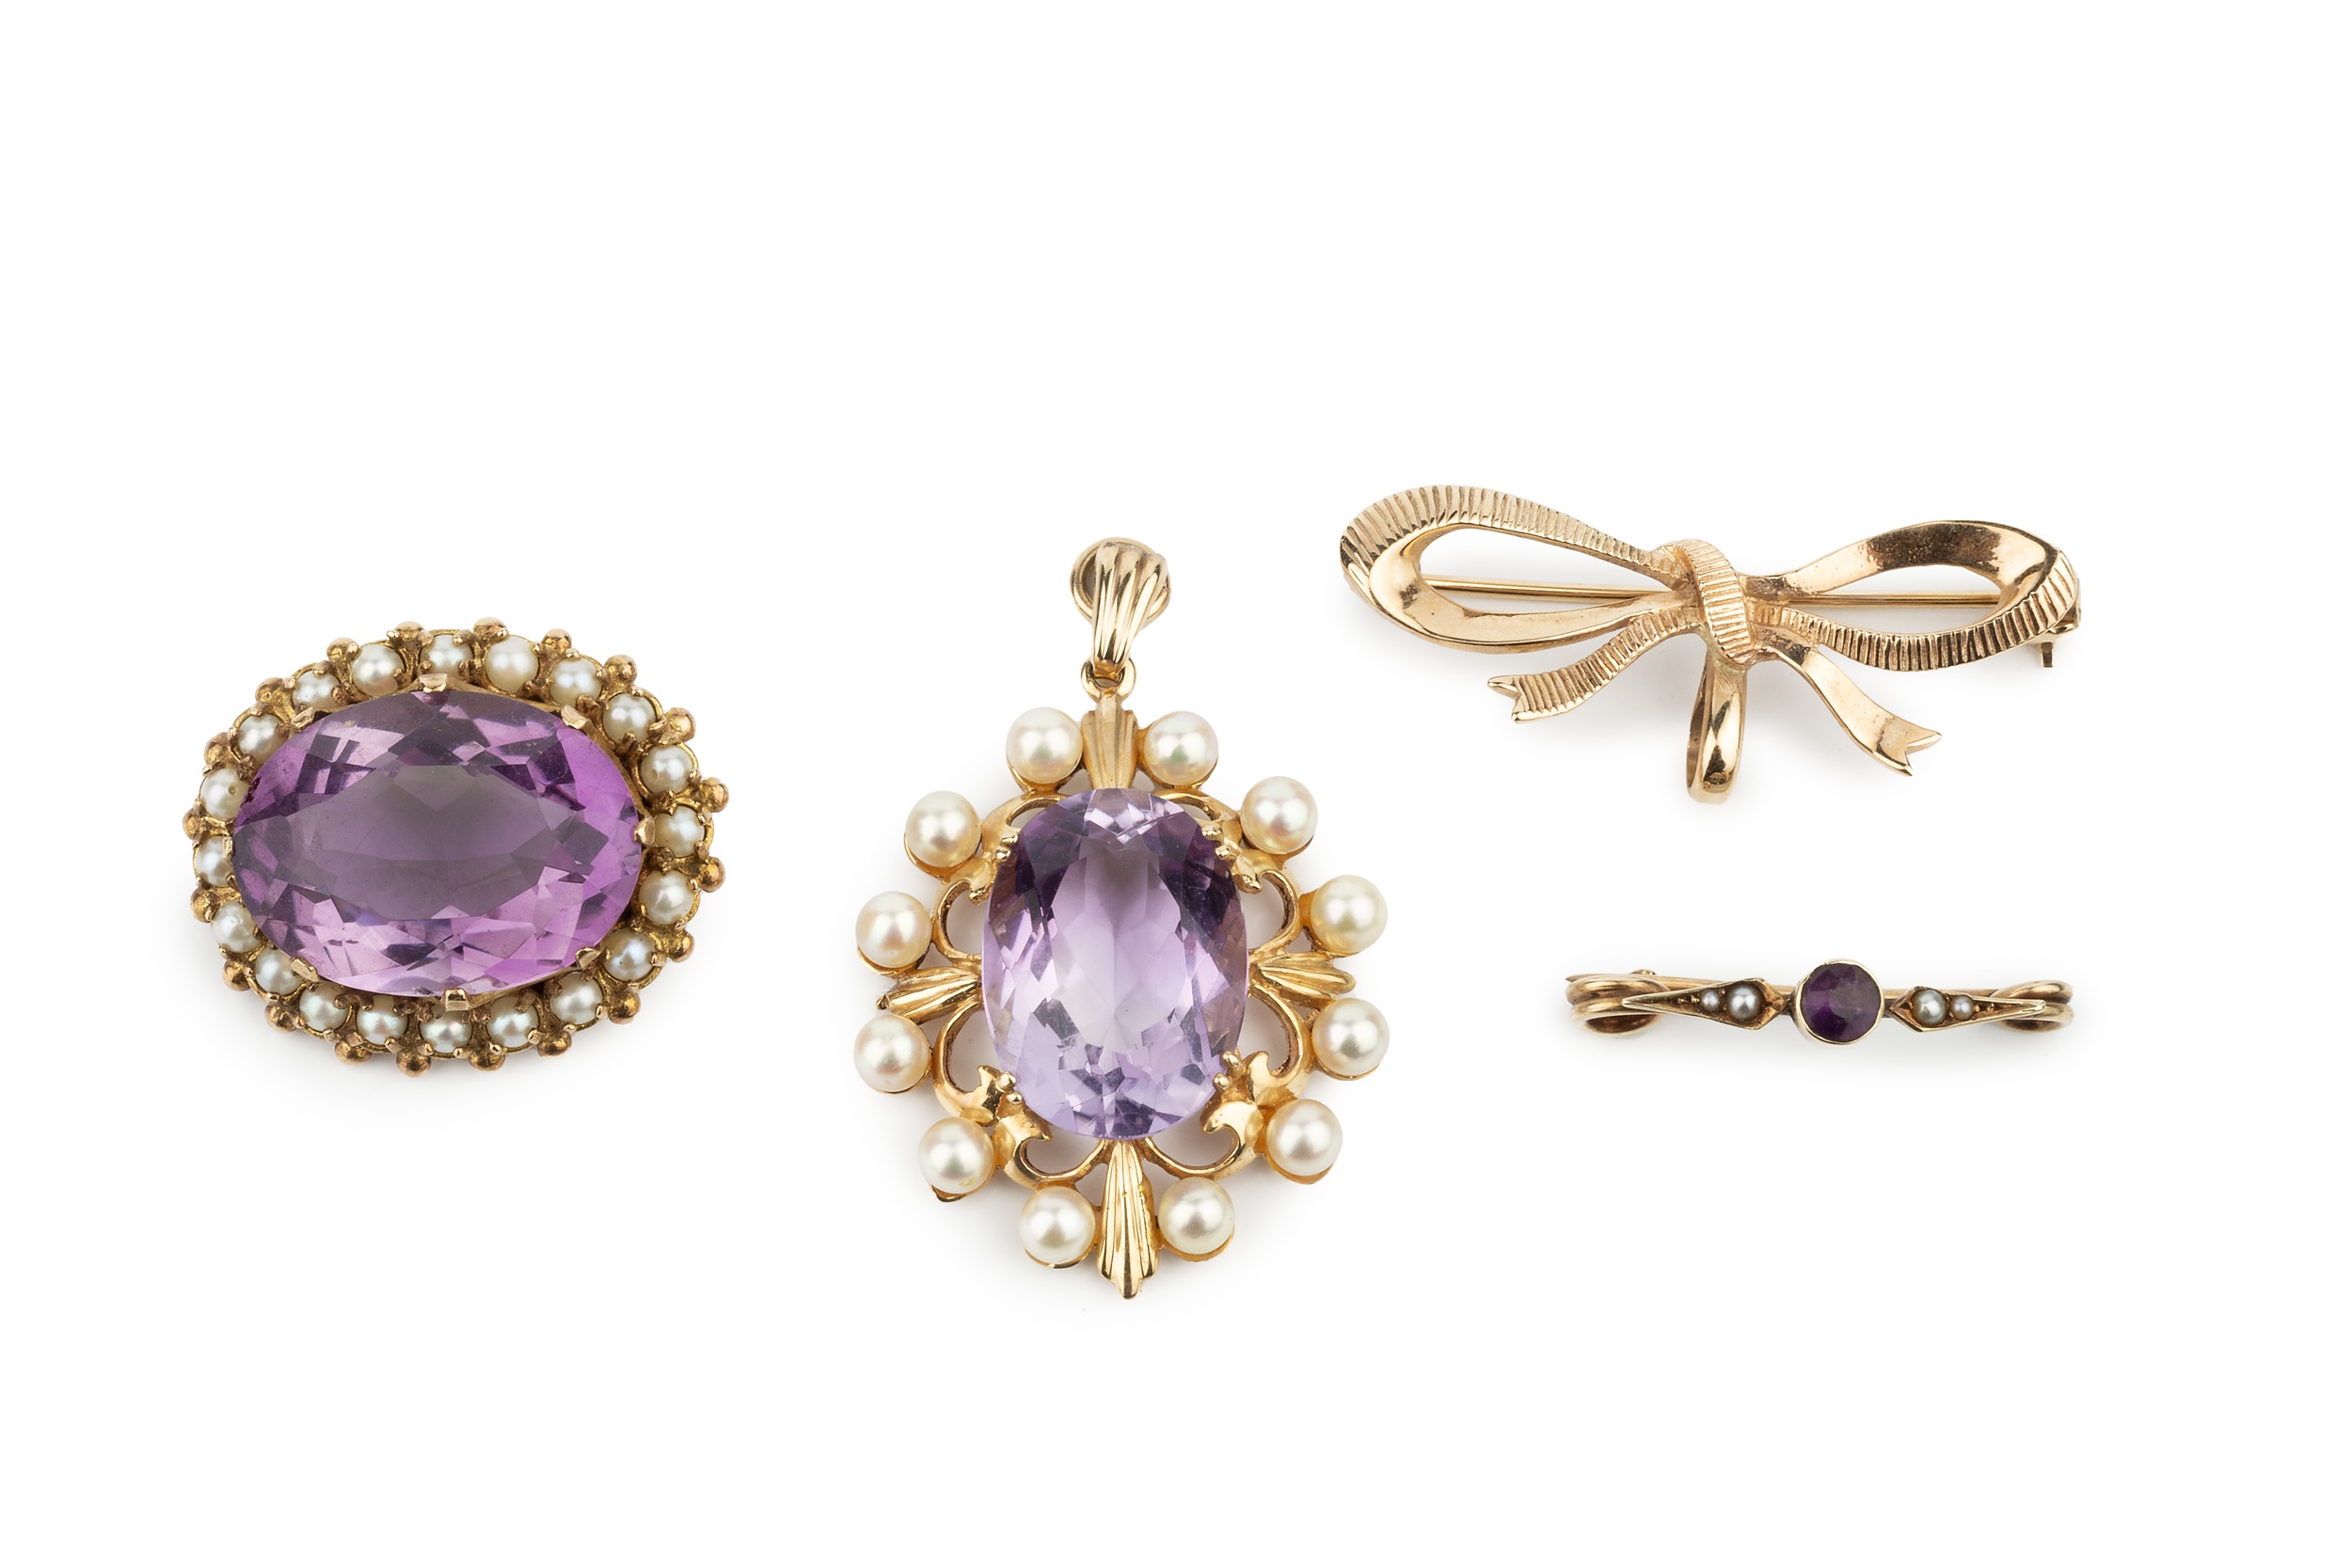 An amethyst and cultured pearl oval pendant, the oval cut amethyst set in 9ct gold with a border